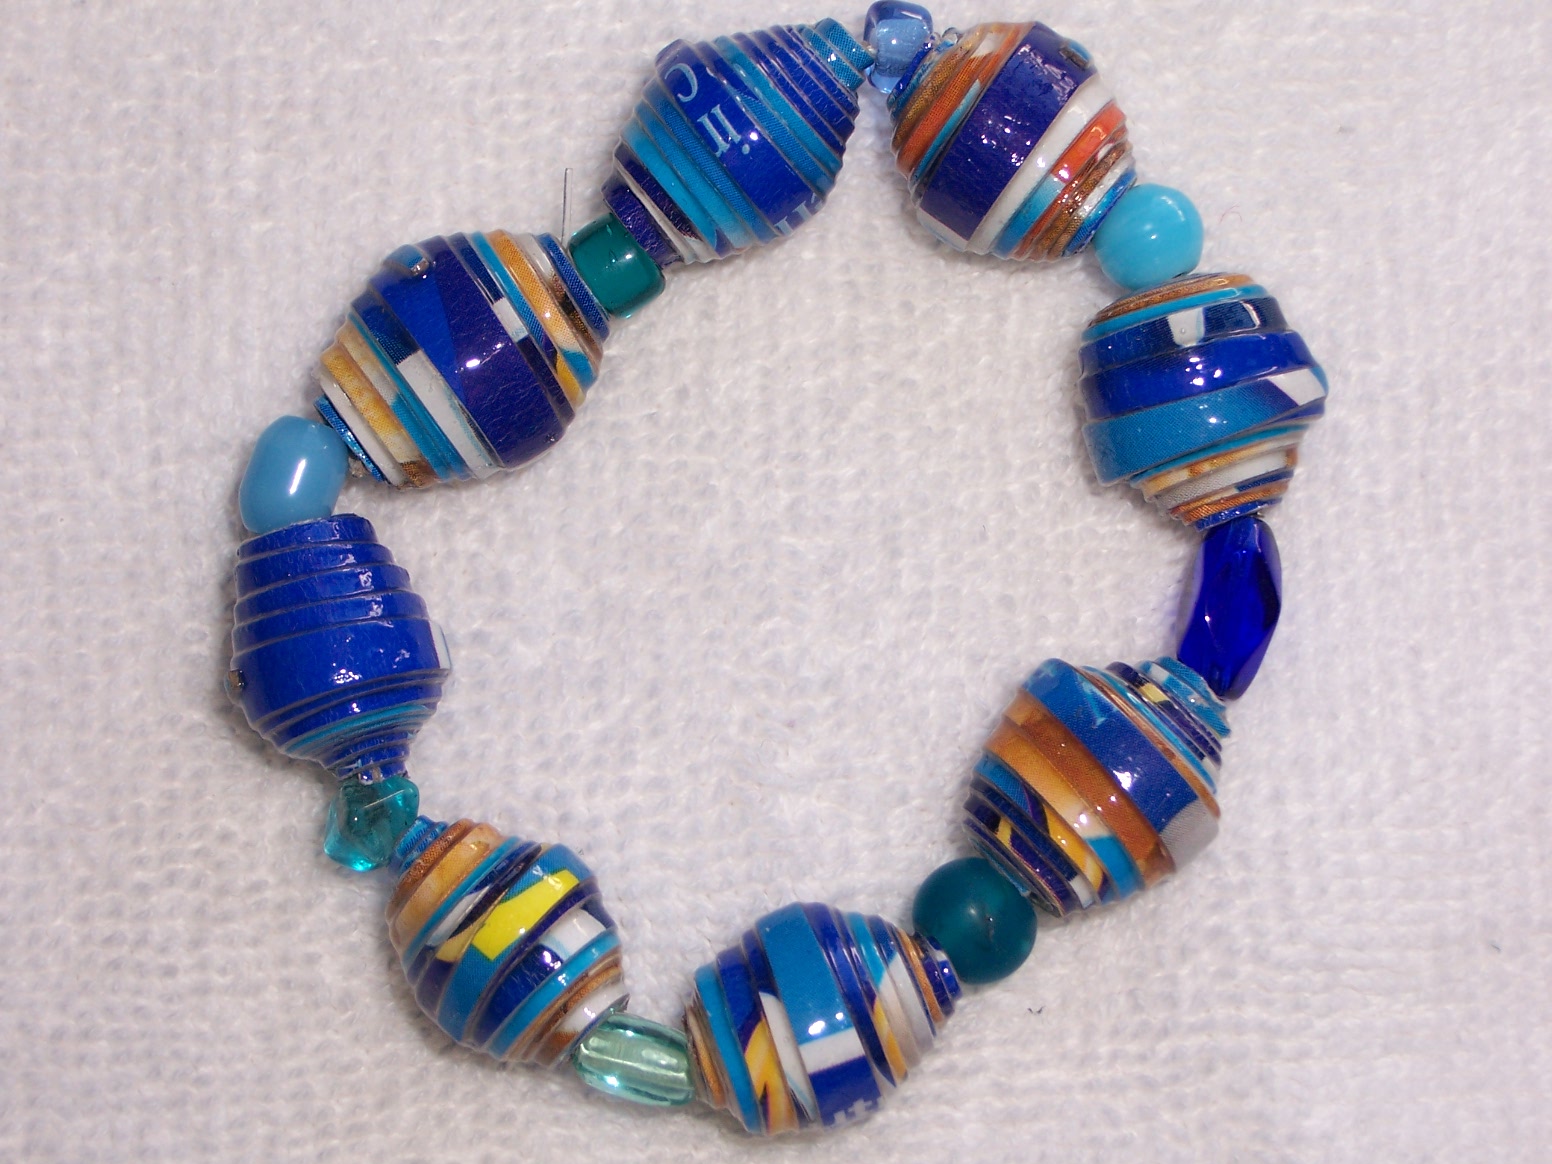 annemadethis: Making Paper Beads